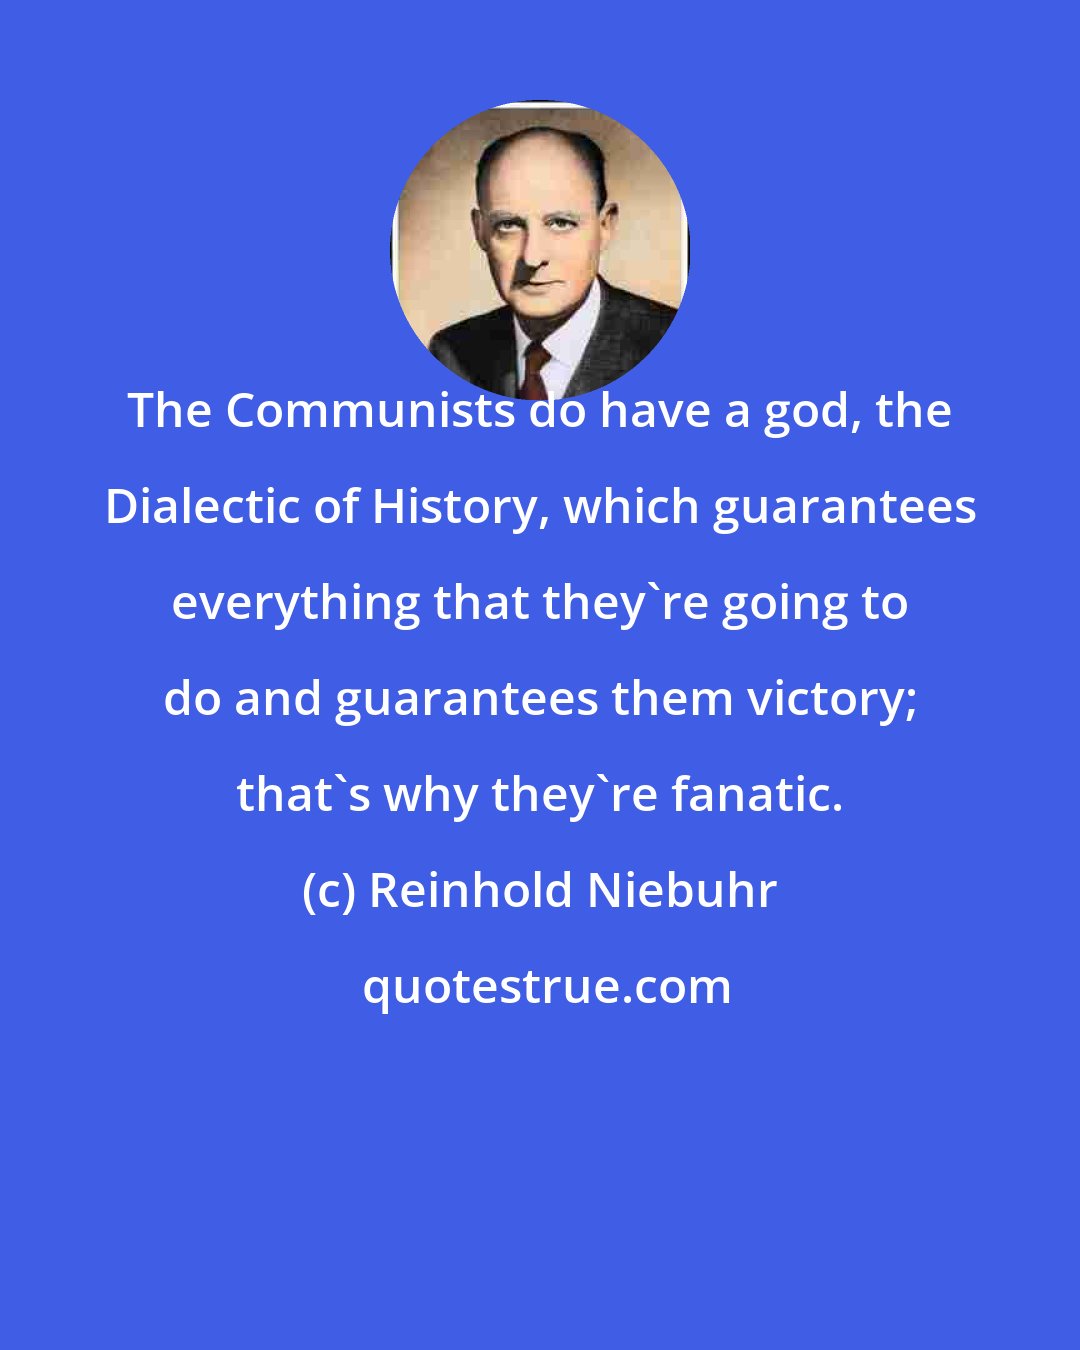 Reinhold Niebuhr: The Communists do have a god, the Dialectic of History, which guarantees everything that they're going to do and guarantees them victory; that's why they're fanatic.